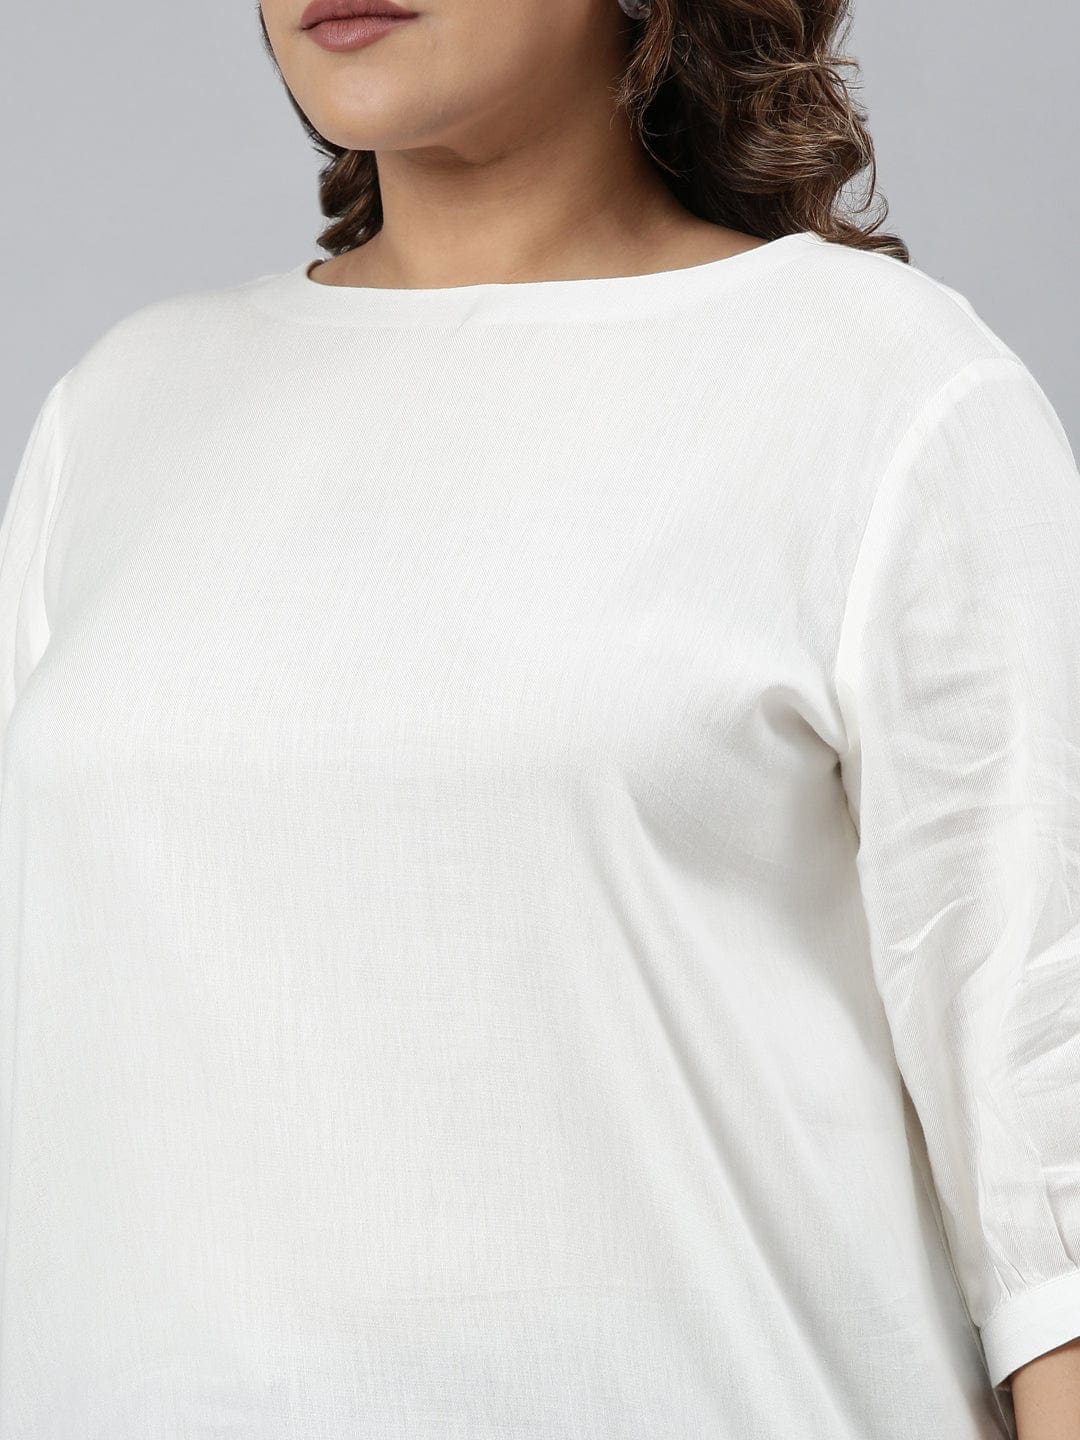 white cotton tops Affordable and Versatile elegant chic casual classic –  TheShaili